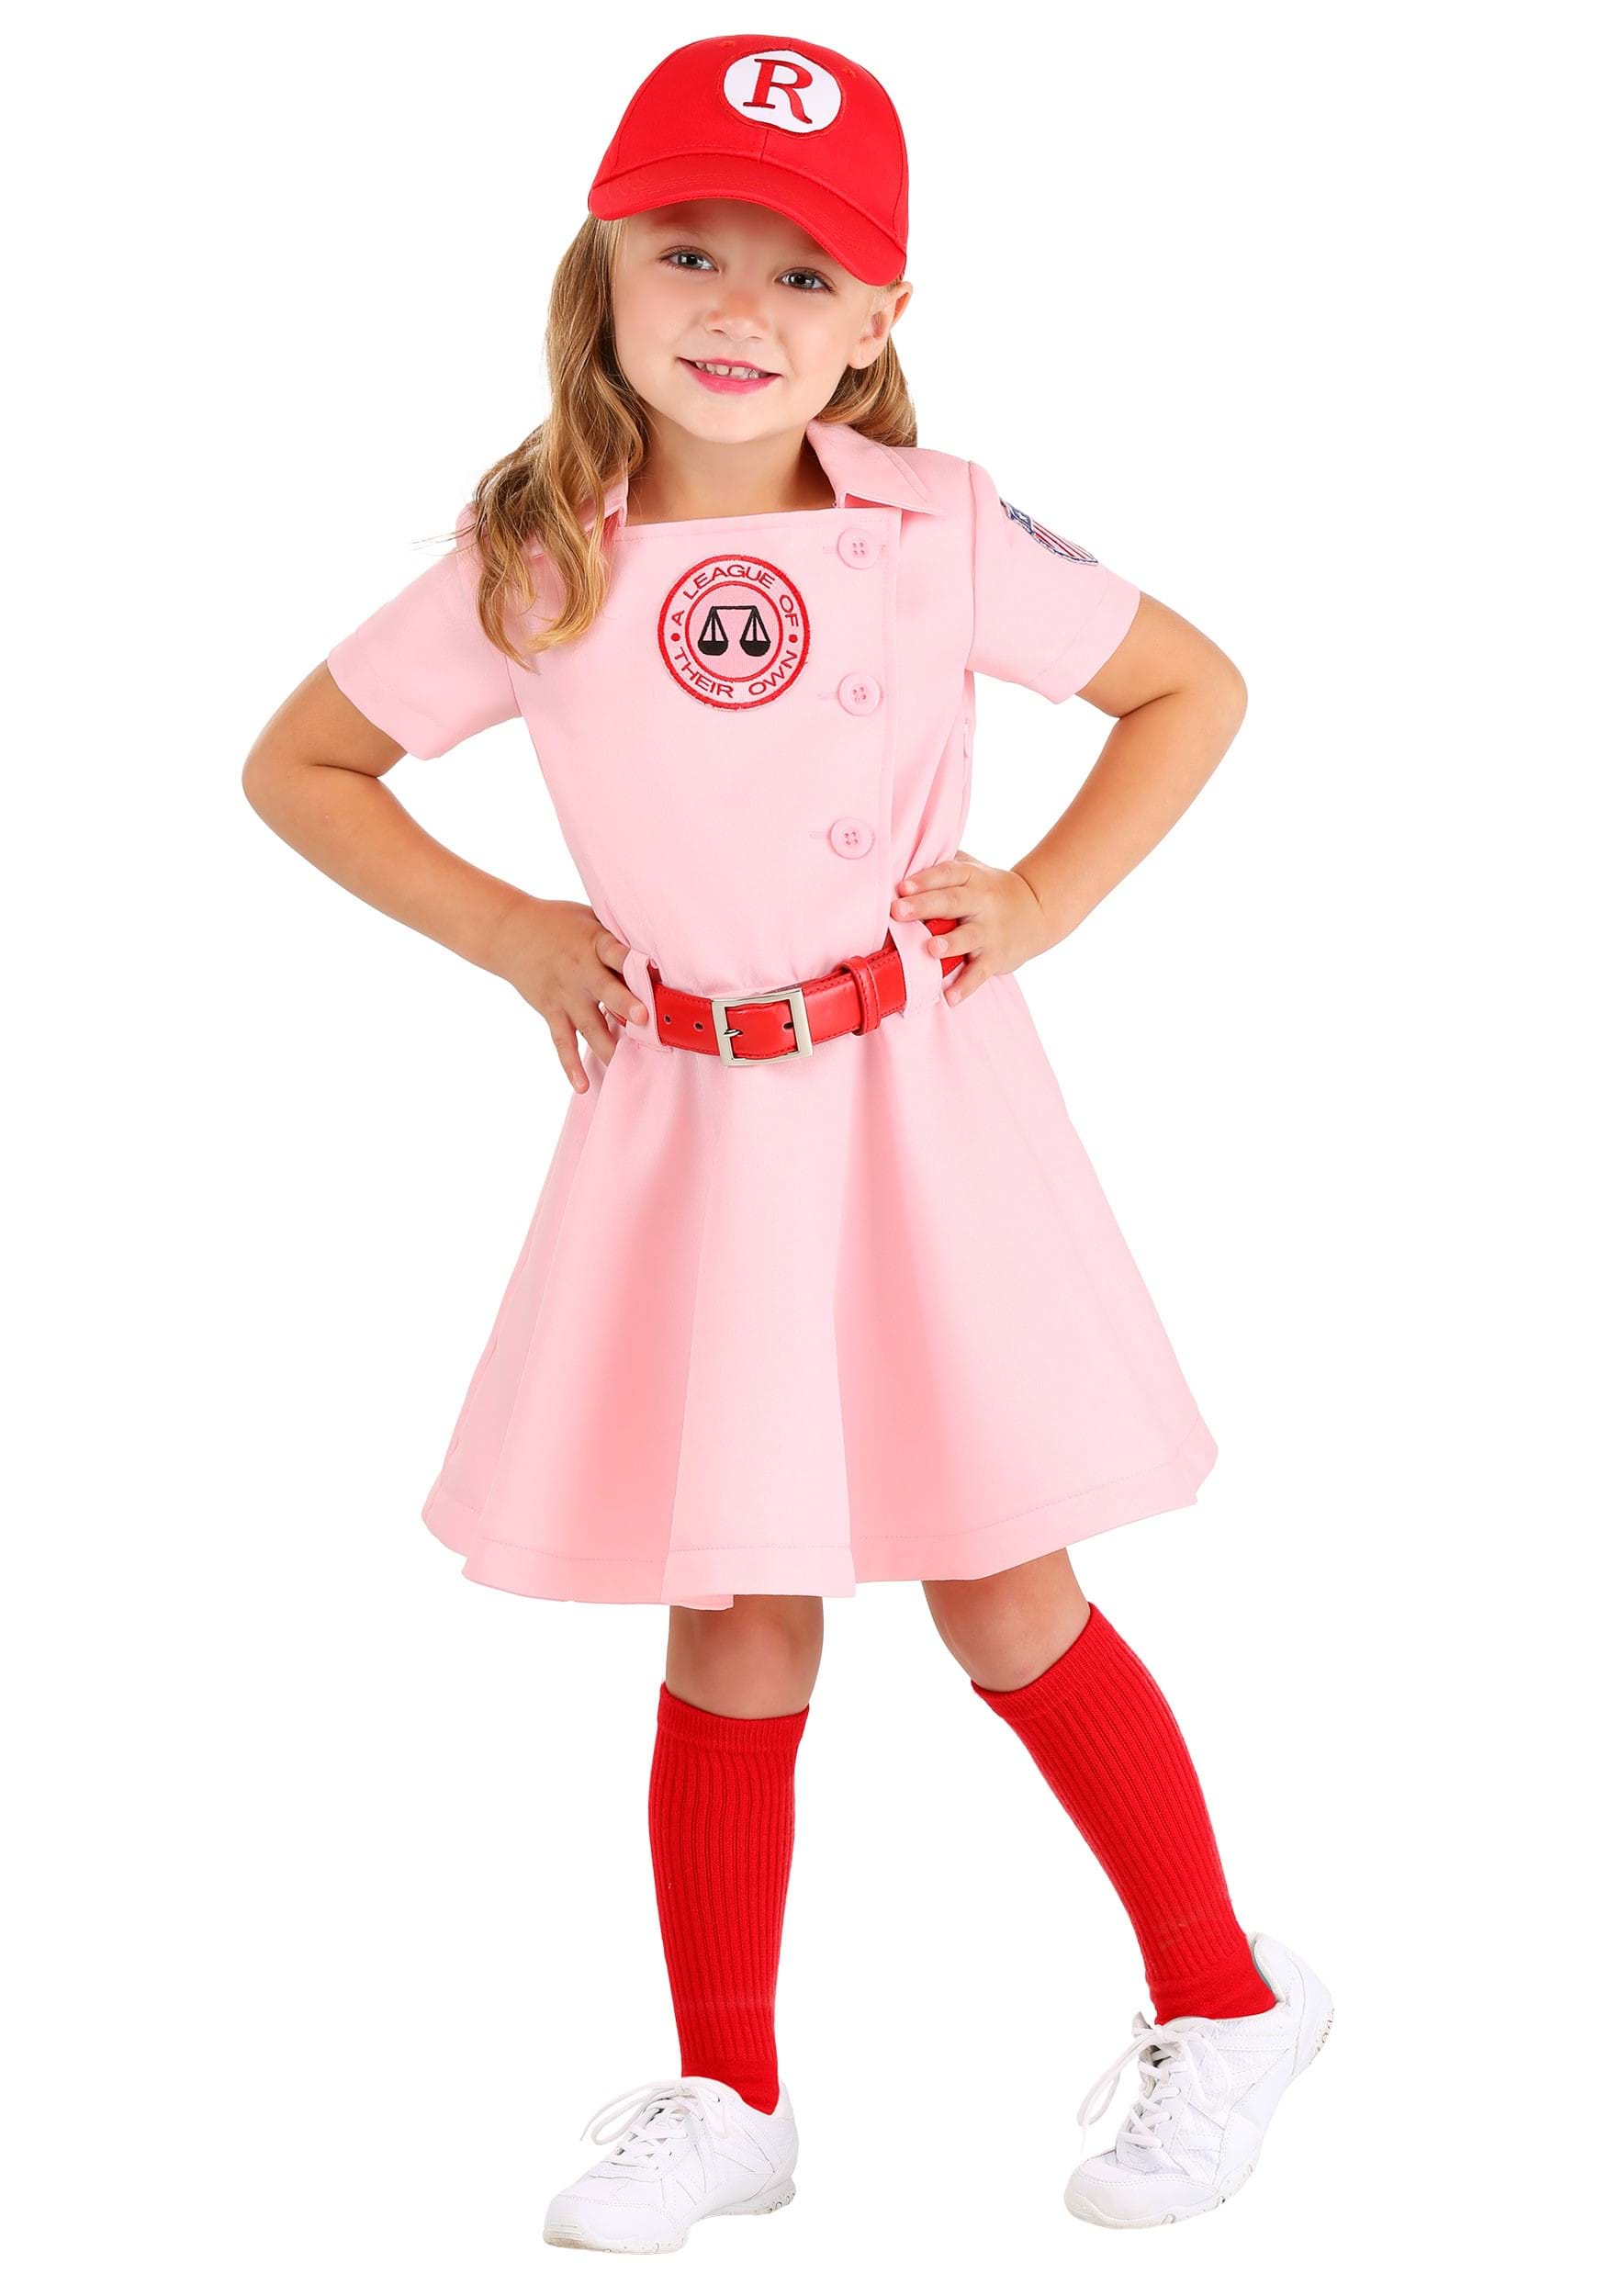 Image of FUN Costumes League of Their Own Dottie Luxury Costume for Toddler